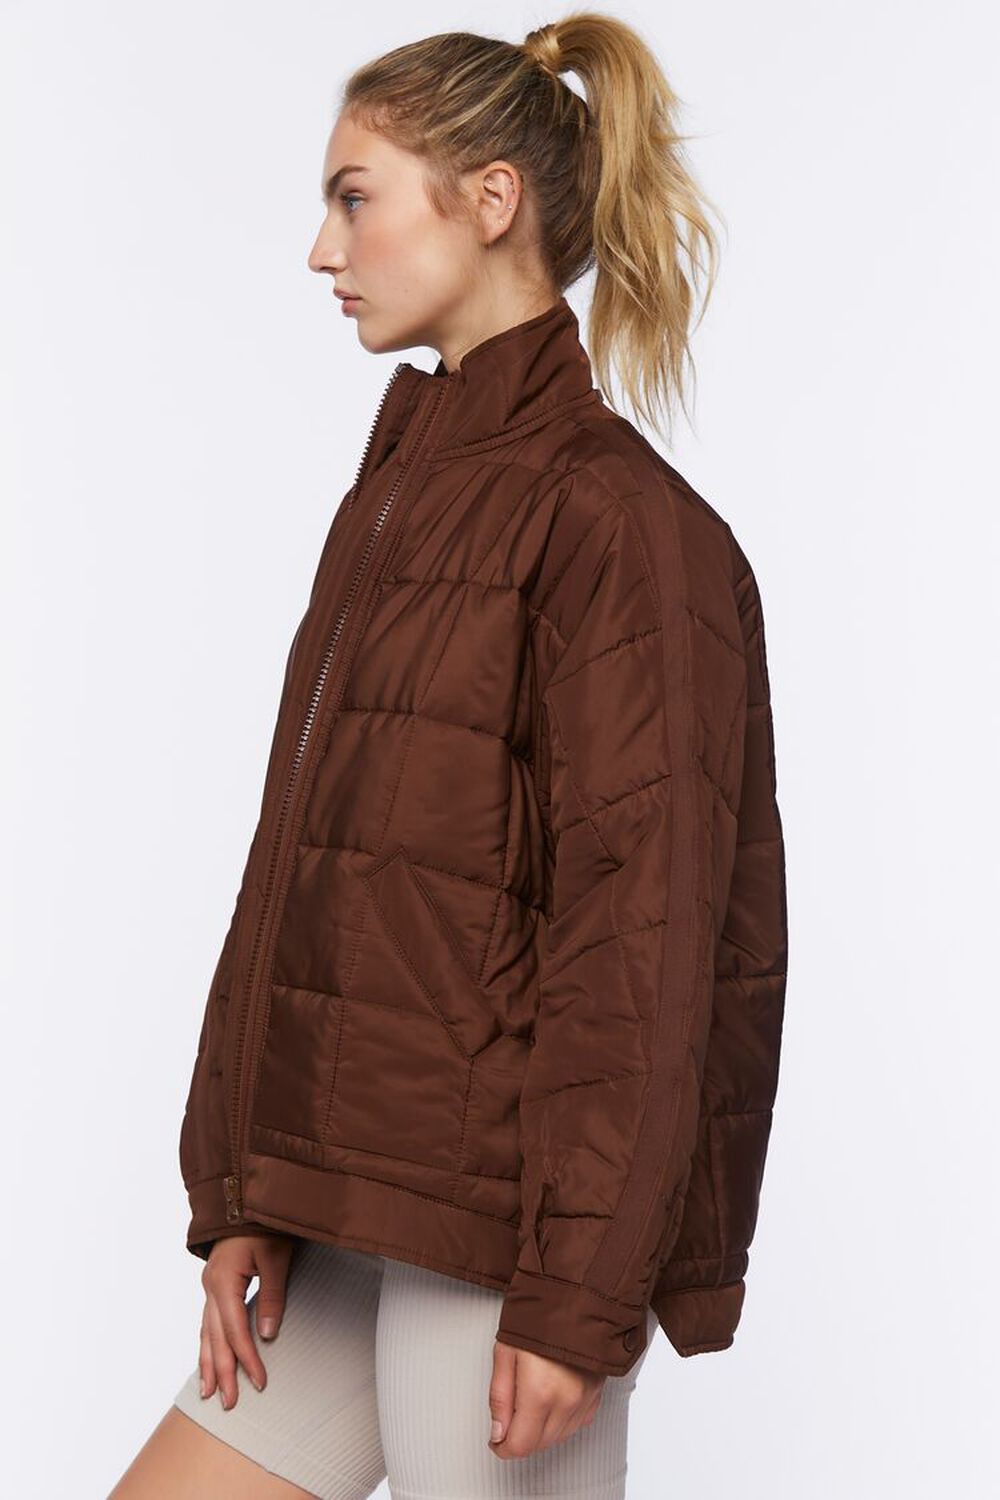 TURKISH COFFEE Active Quilted Puffer Jacket, image 2